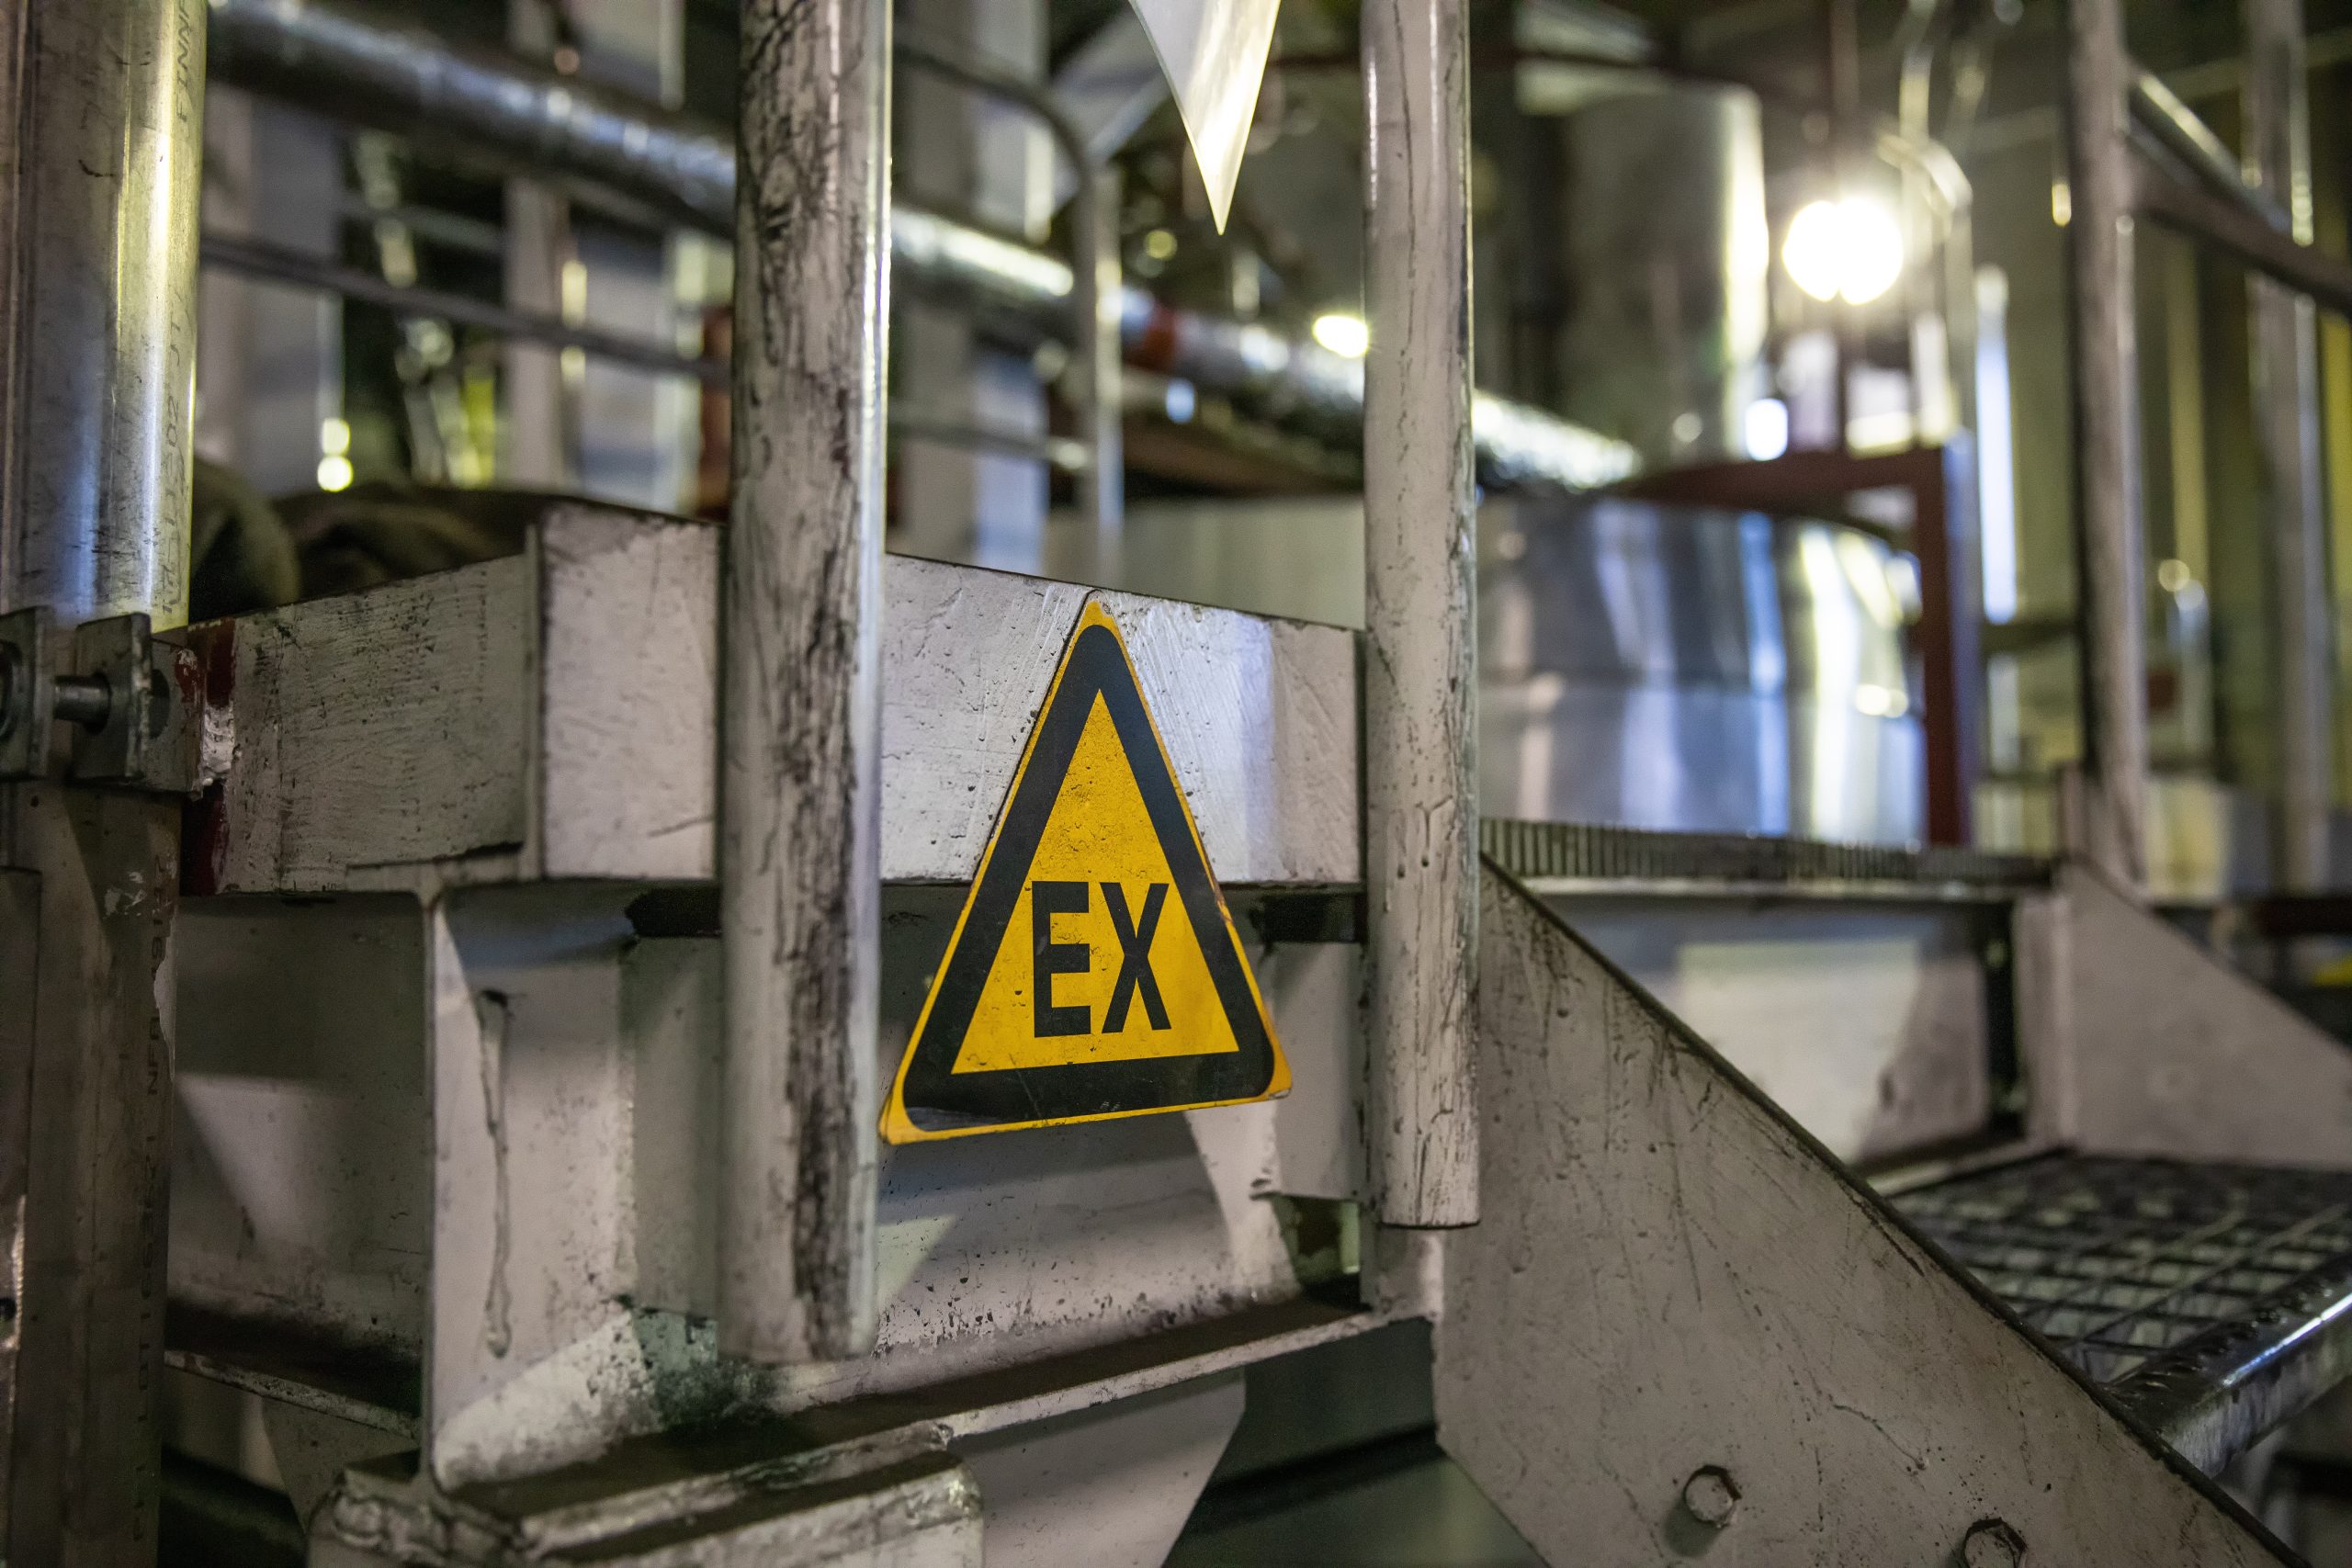 A view of an ATEX hazardous area with industrial equipment and warning signs. The area is designated as hazardous due to the presence of potentially explosive atmospheres. The image conveys the concept of industrial safety and the need for specialized equipment and precautions in hazardous environments.